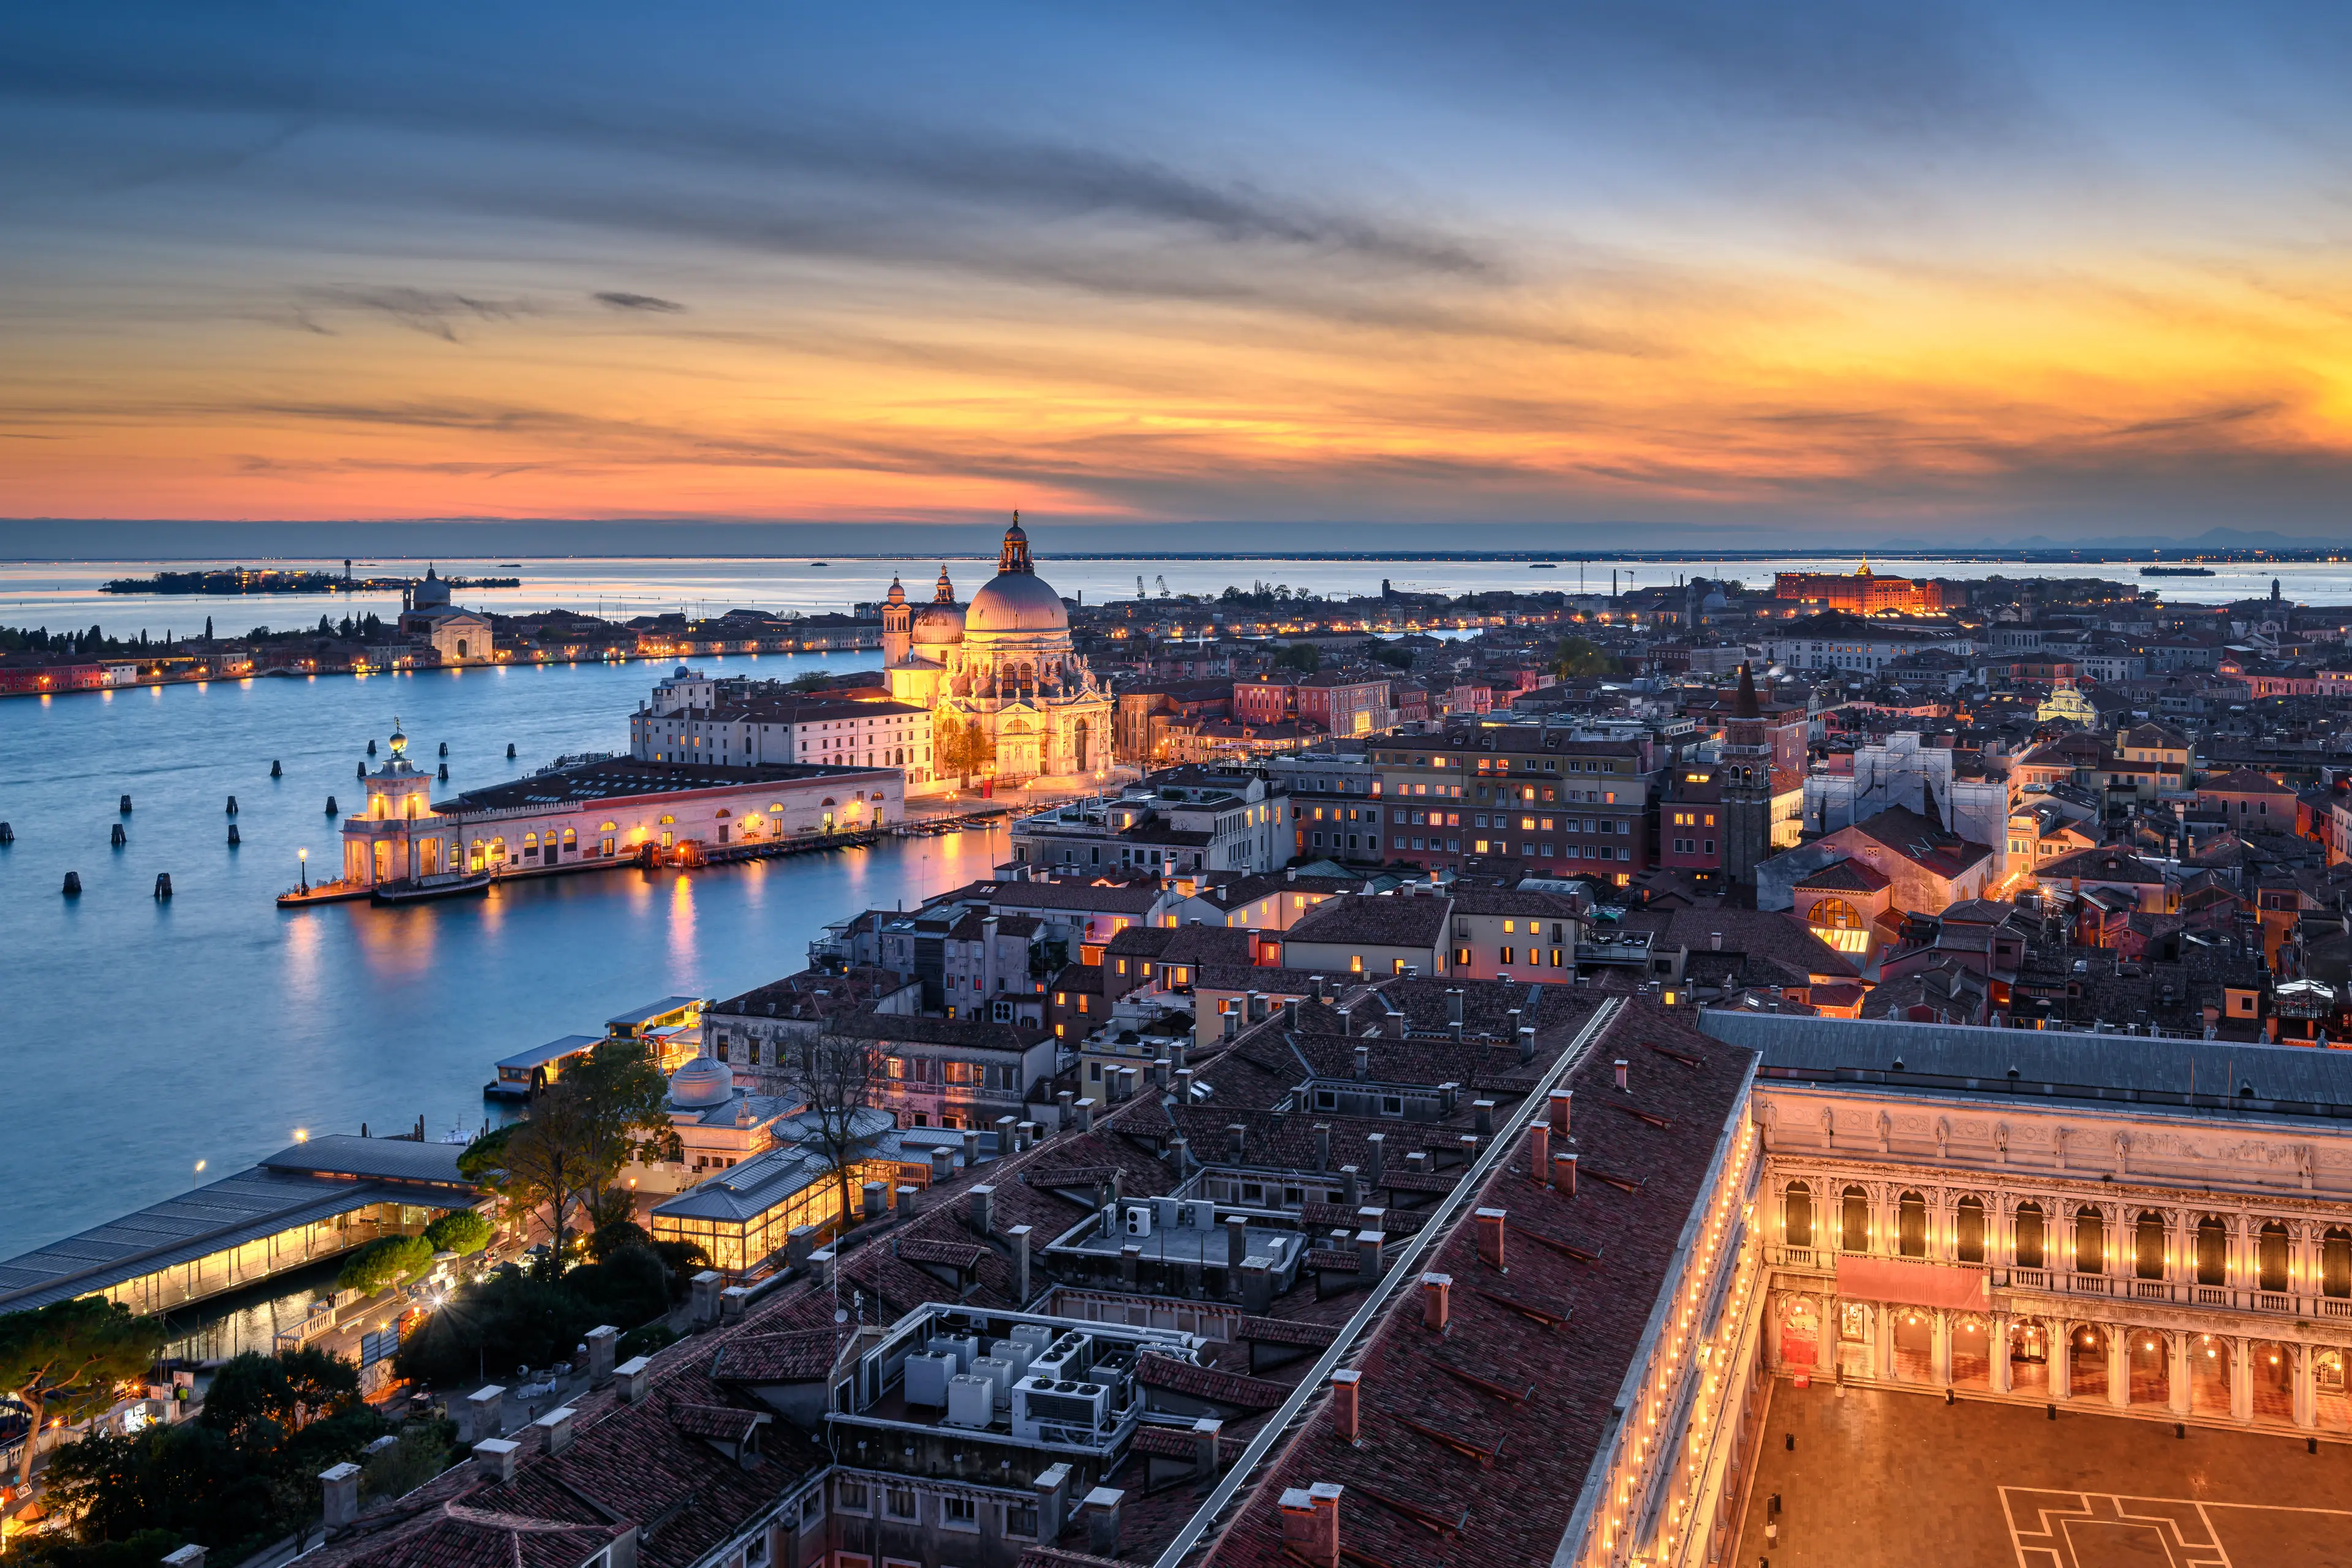 1-Day Gourmet Food and Wine Tour in Venice, Italy